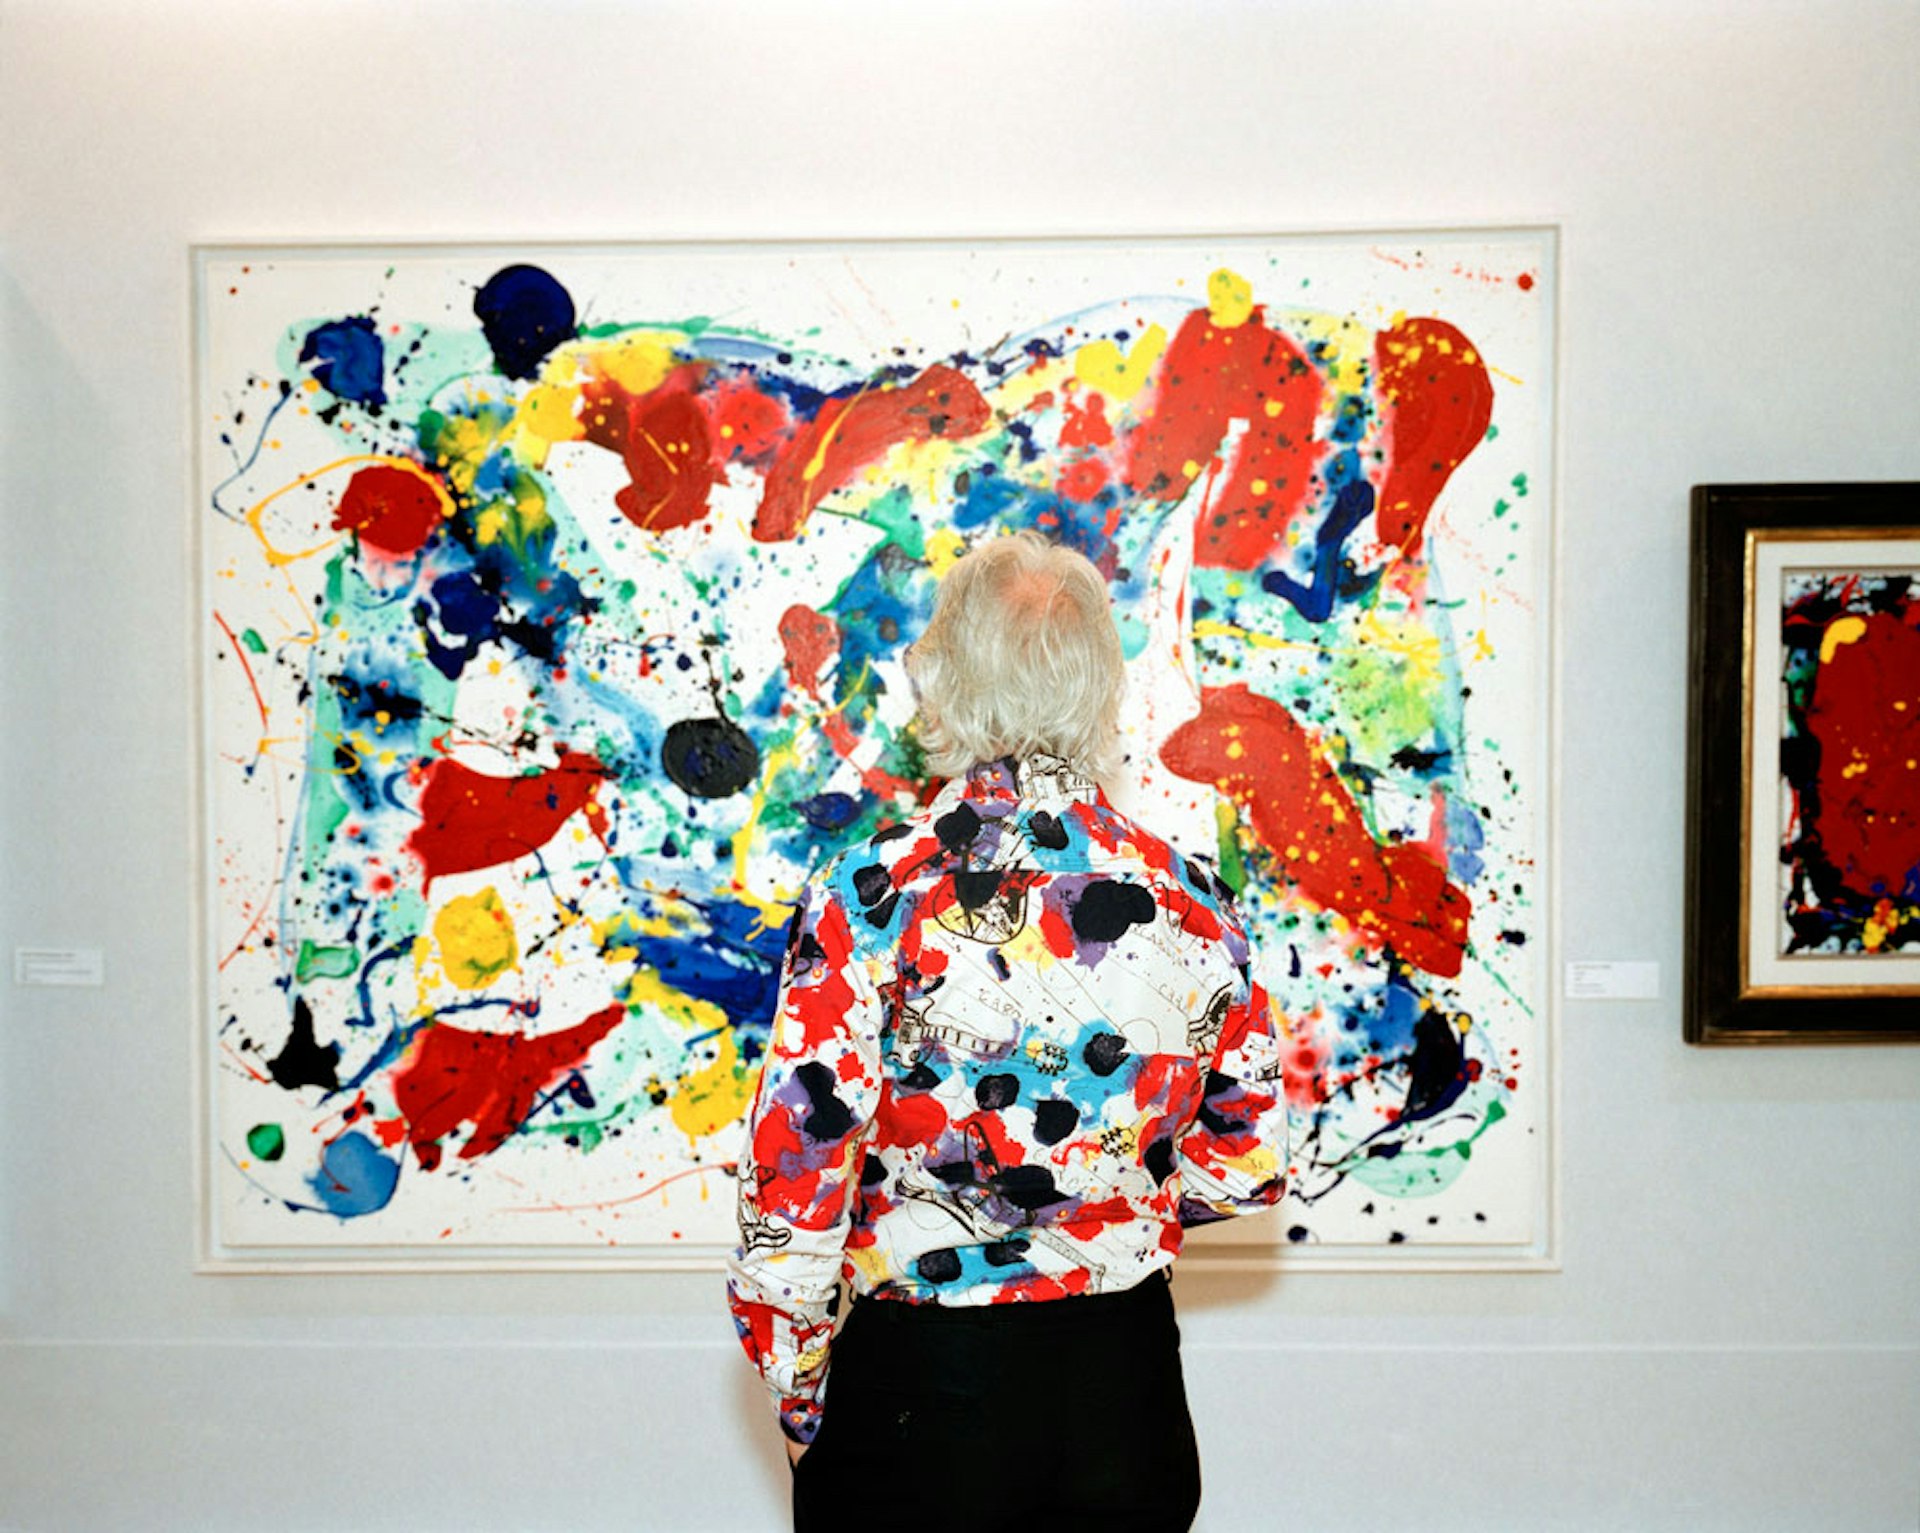 Martin-Parr-Abstract-painting-with-abstract-shirt-United-Arab-Emirates-Dubai-DIFC-Gulf-Art-Fair-2007-c-Martin-Parr-small